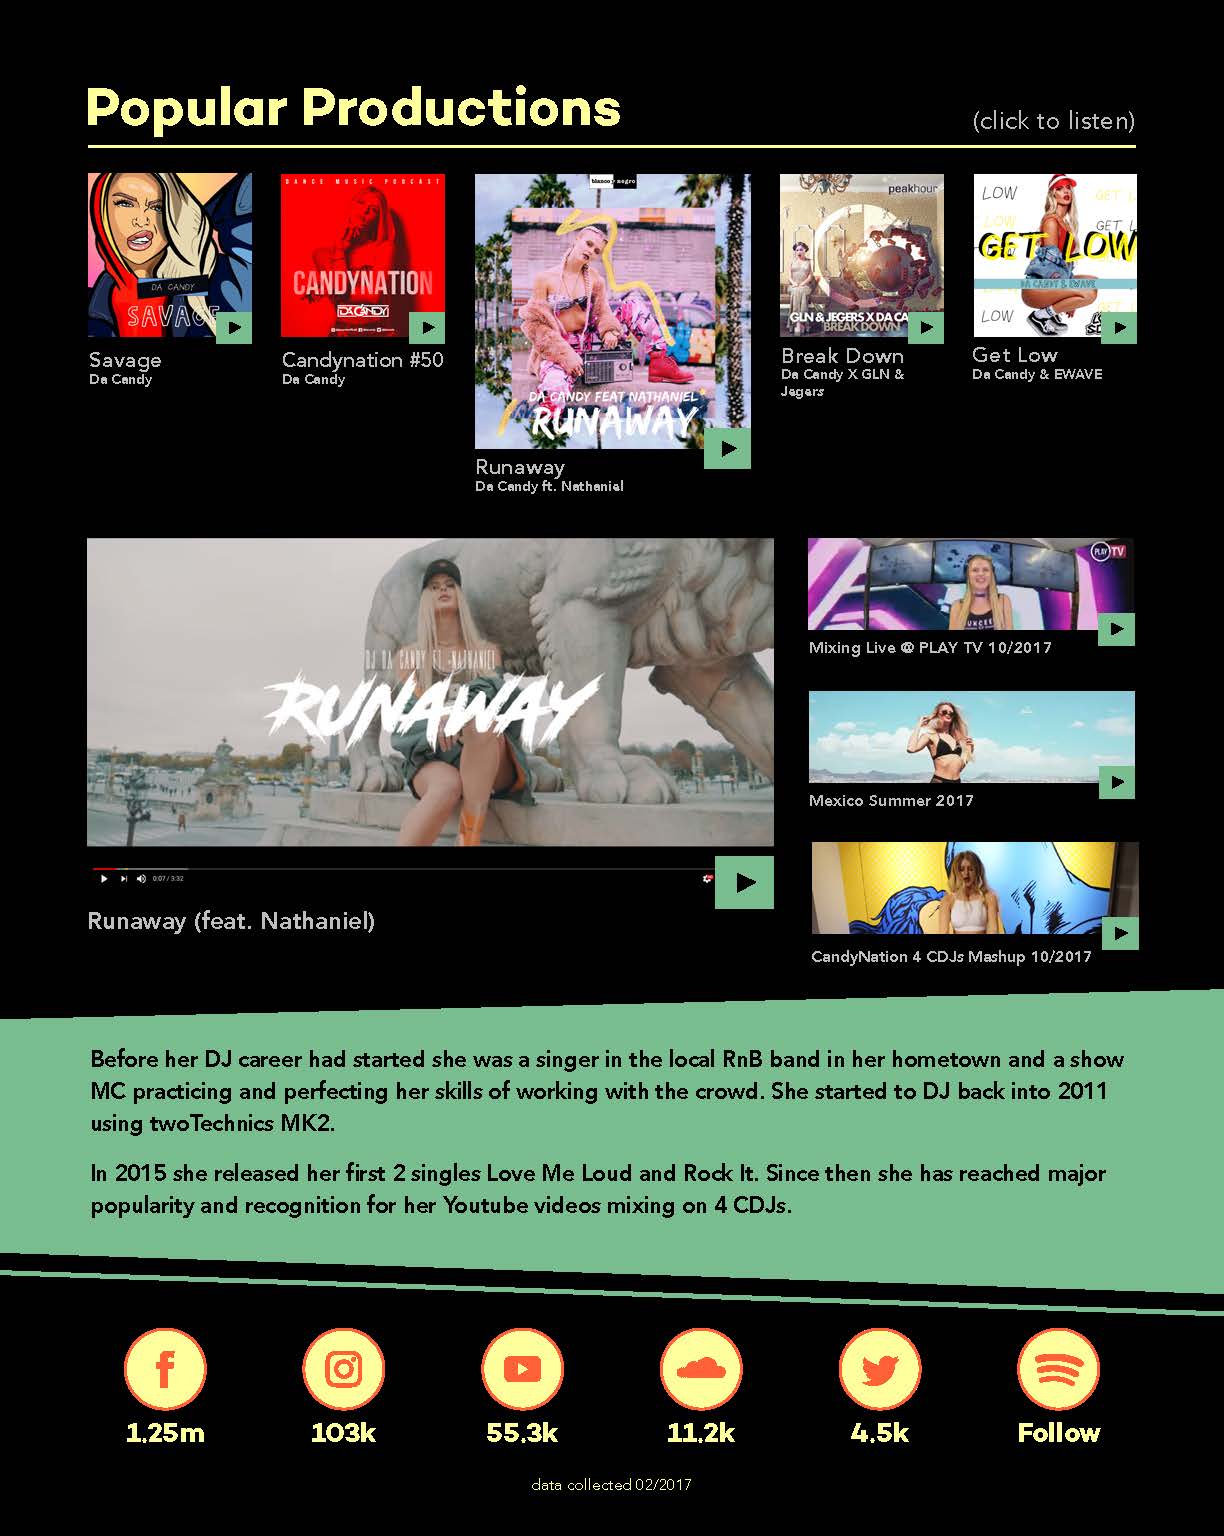 A screen shot of the popular productions website.